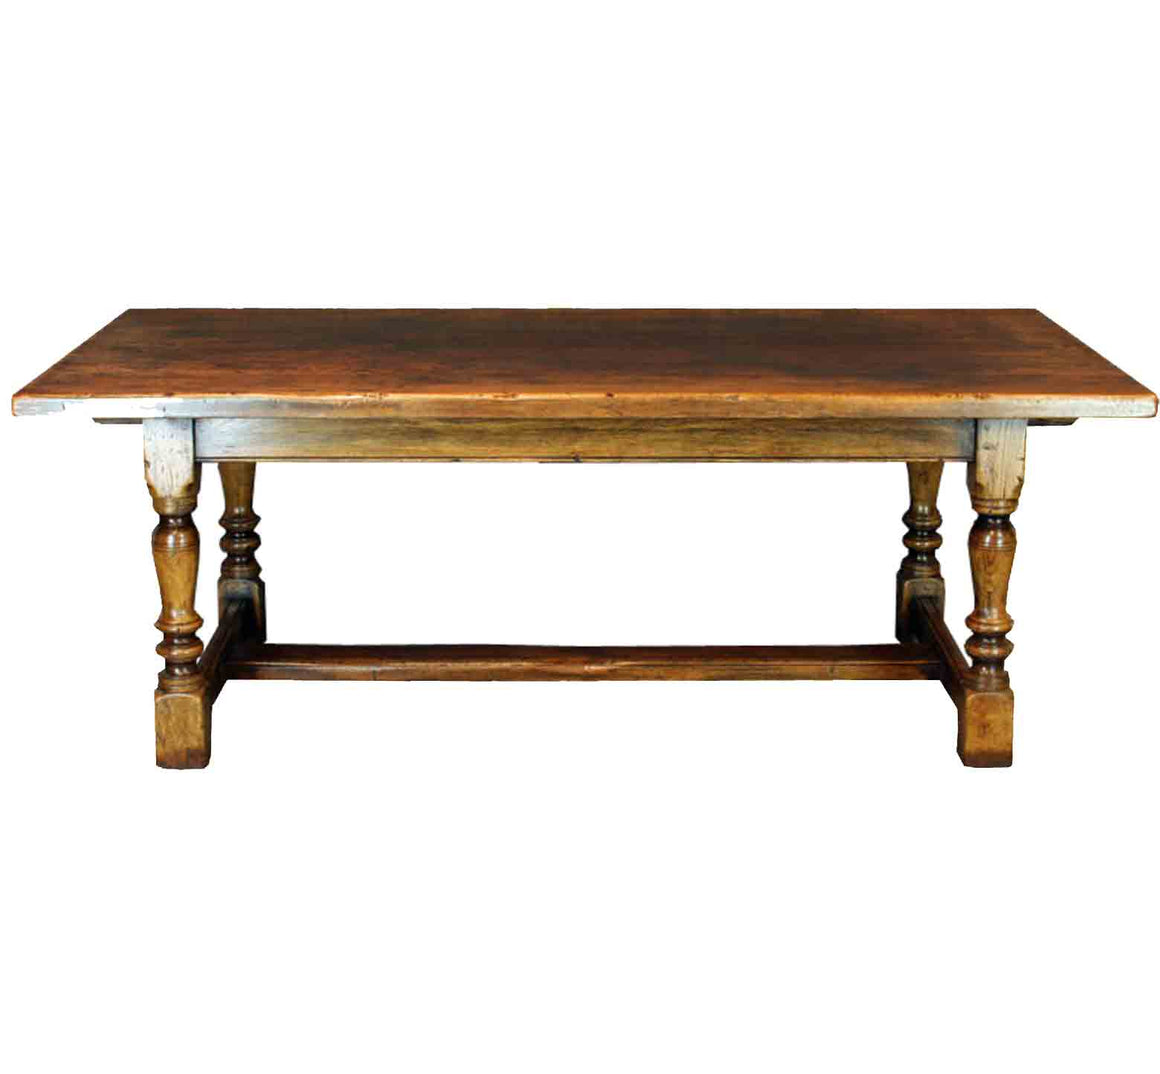 Penshurst Turned Leg Refectory Table in Solid English Oak